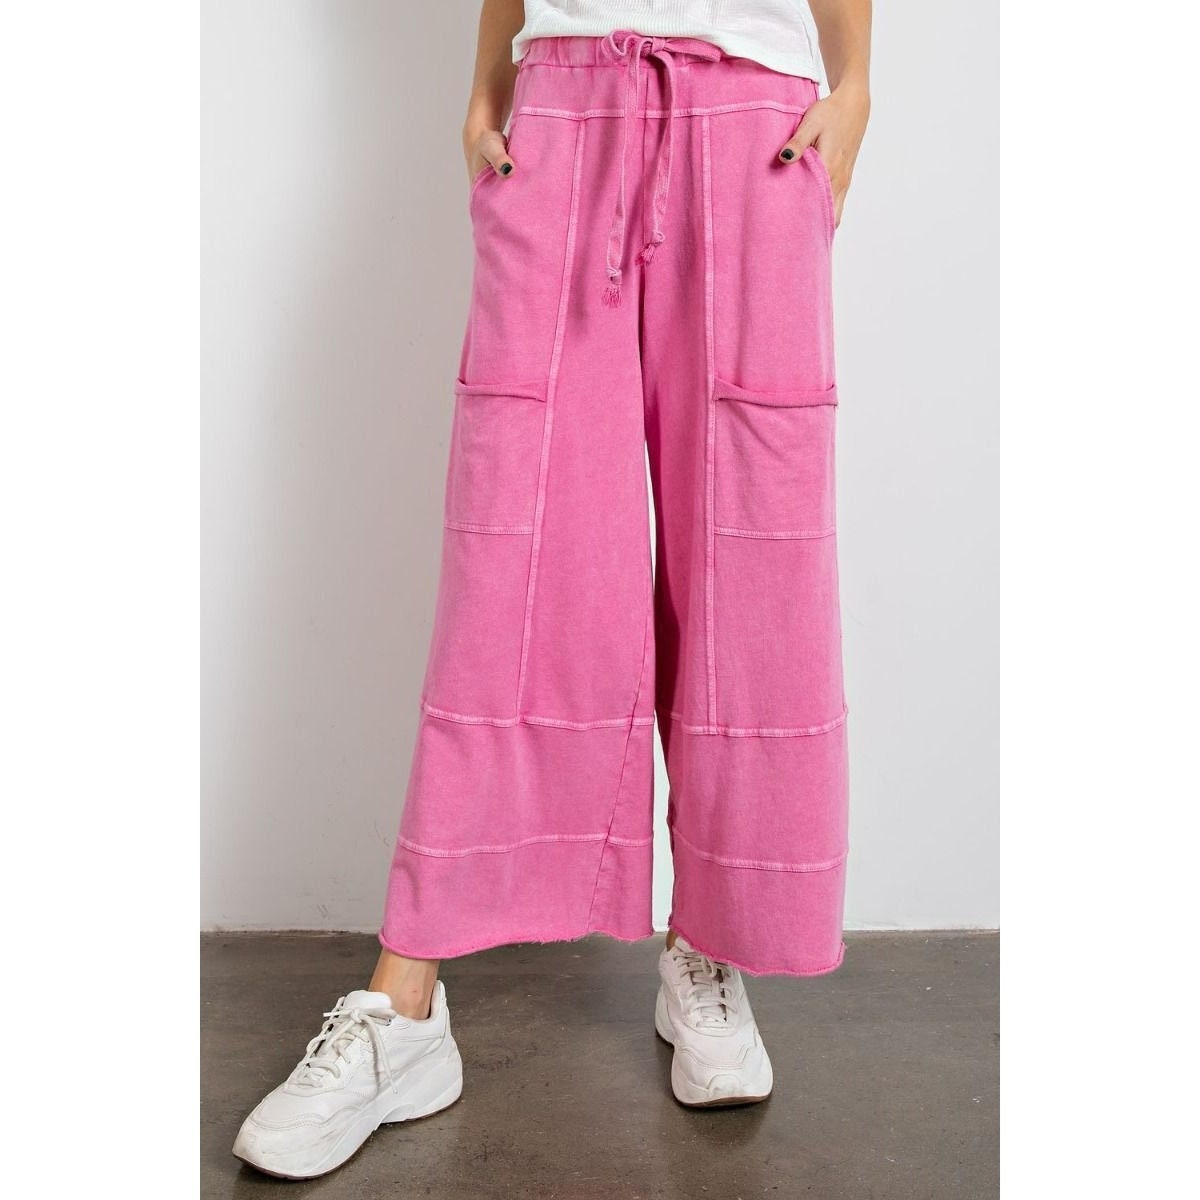 Easel Lazy Days Mineral Washed Wide Leg Pants in Barbie Pink - Etsy